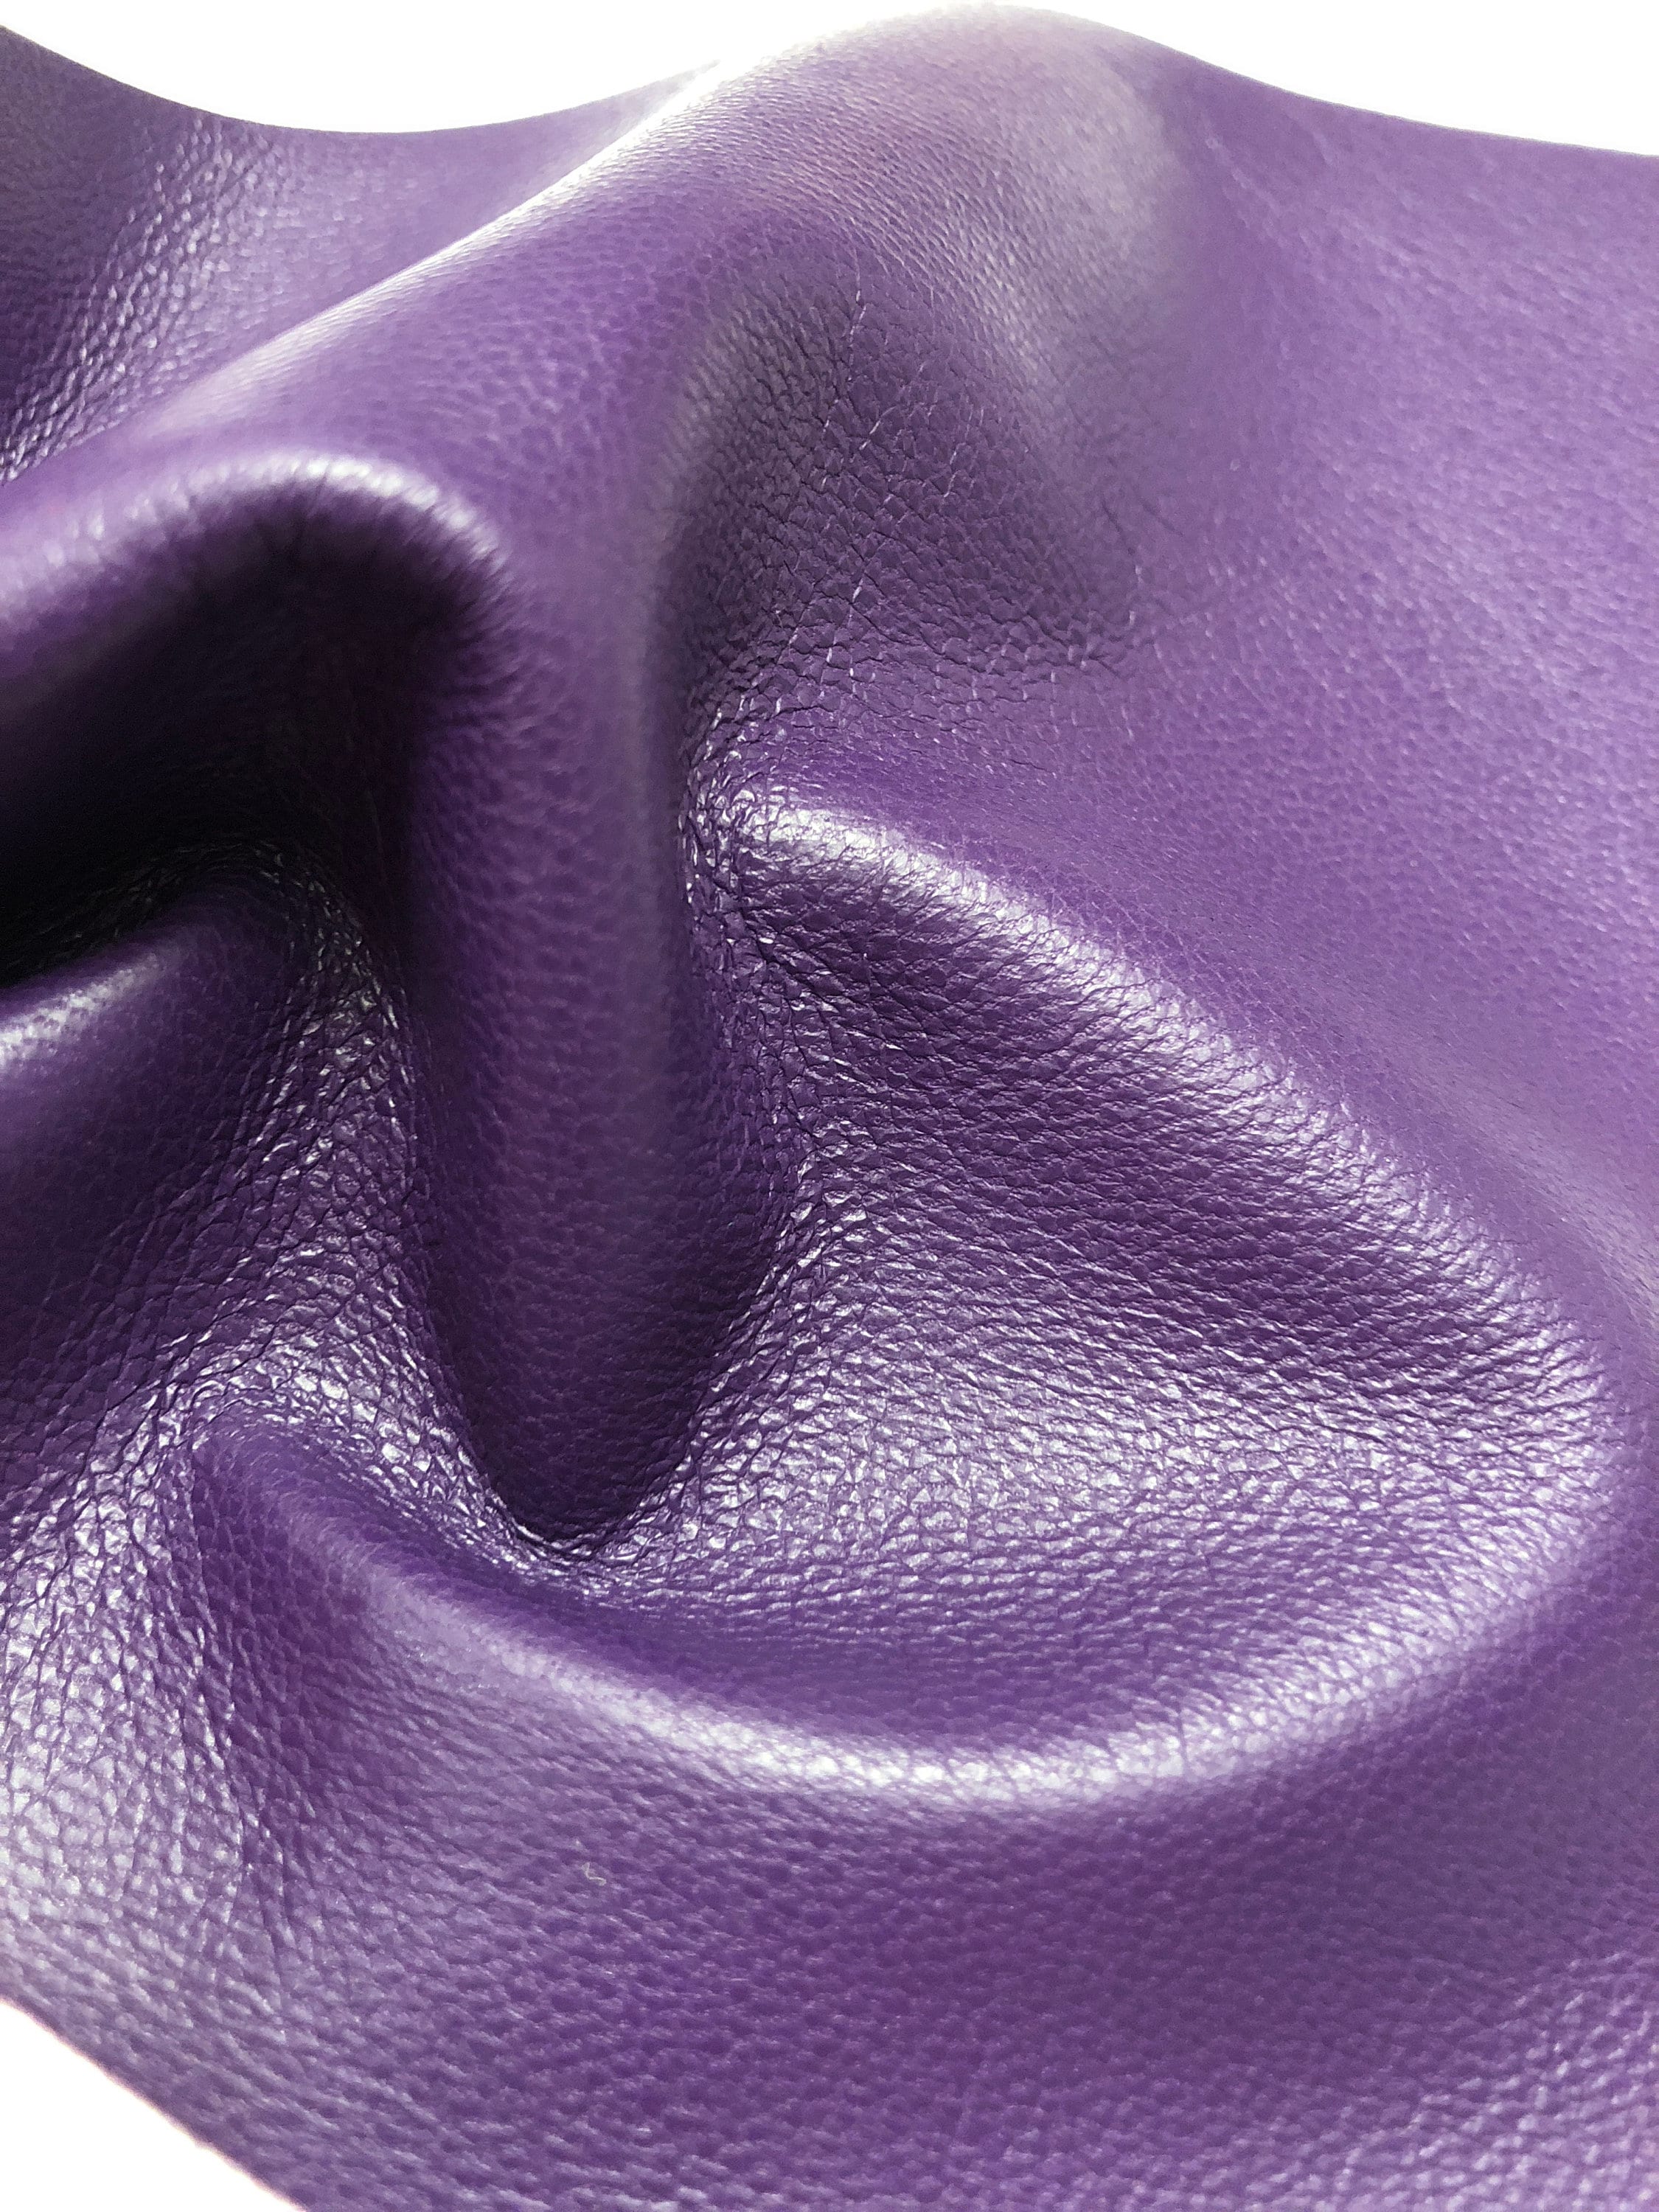 PURPLE SUPERB LEATHER Choose your size top quality leather | Etsy